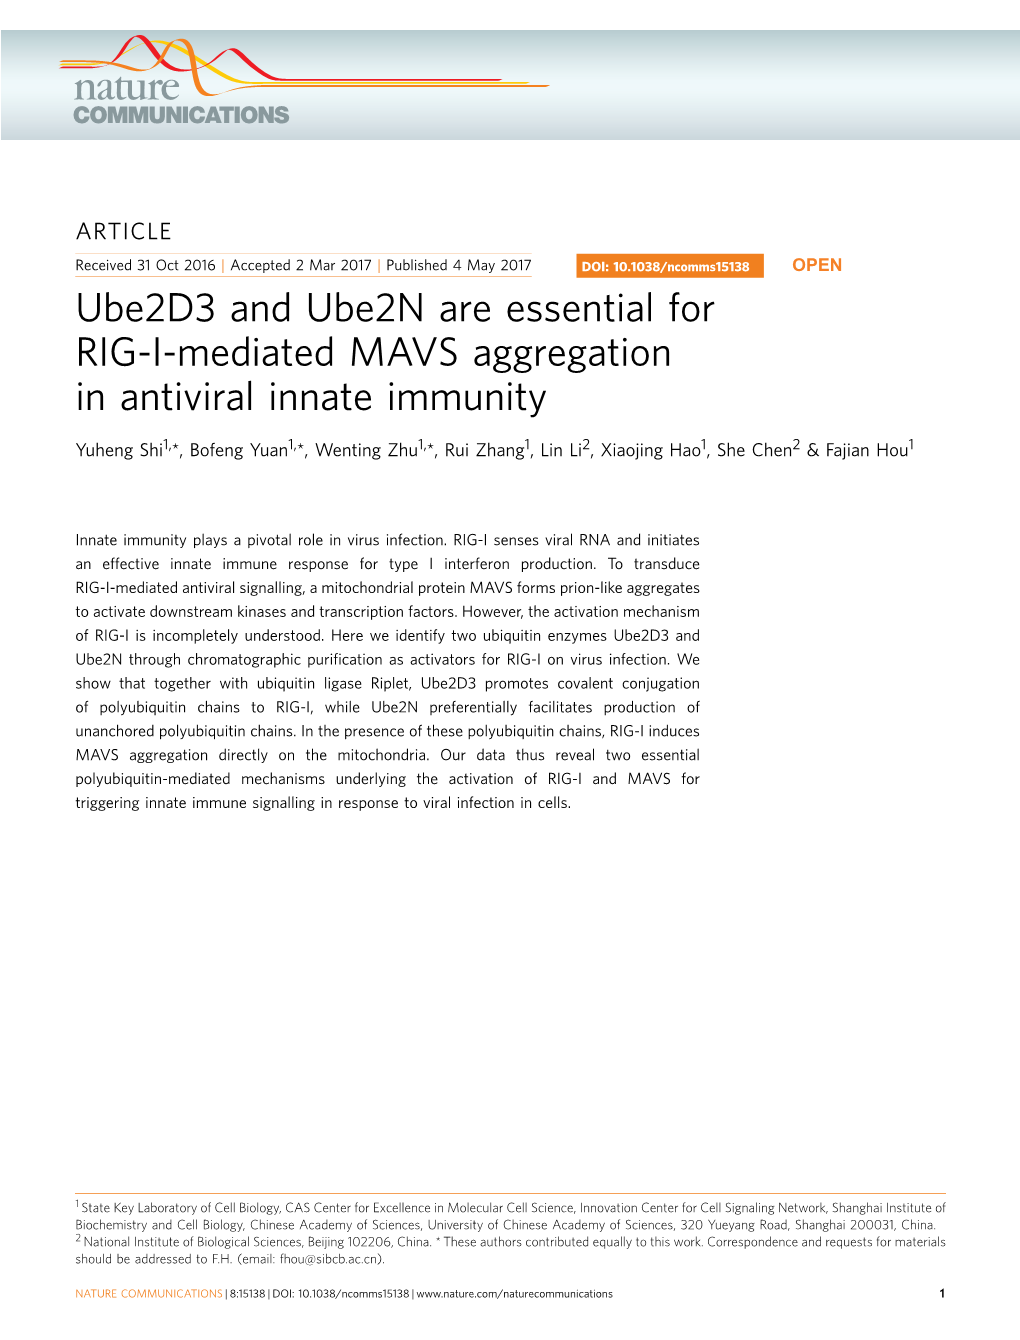 Ube2d3 and Ube2n Are Essential for RIG-I-Mediated MAVS Aggregation in Antiviral Innate Immunity